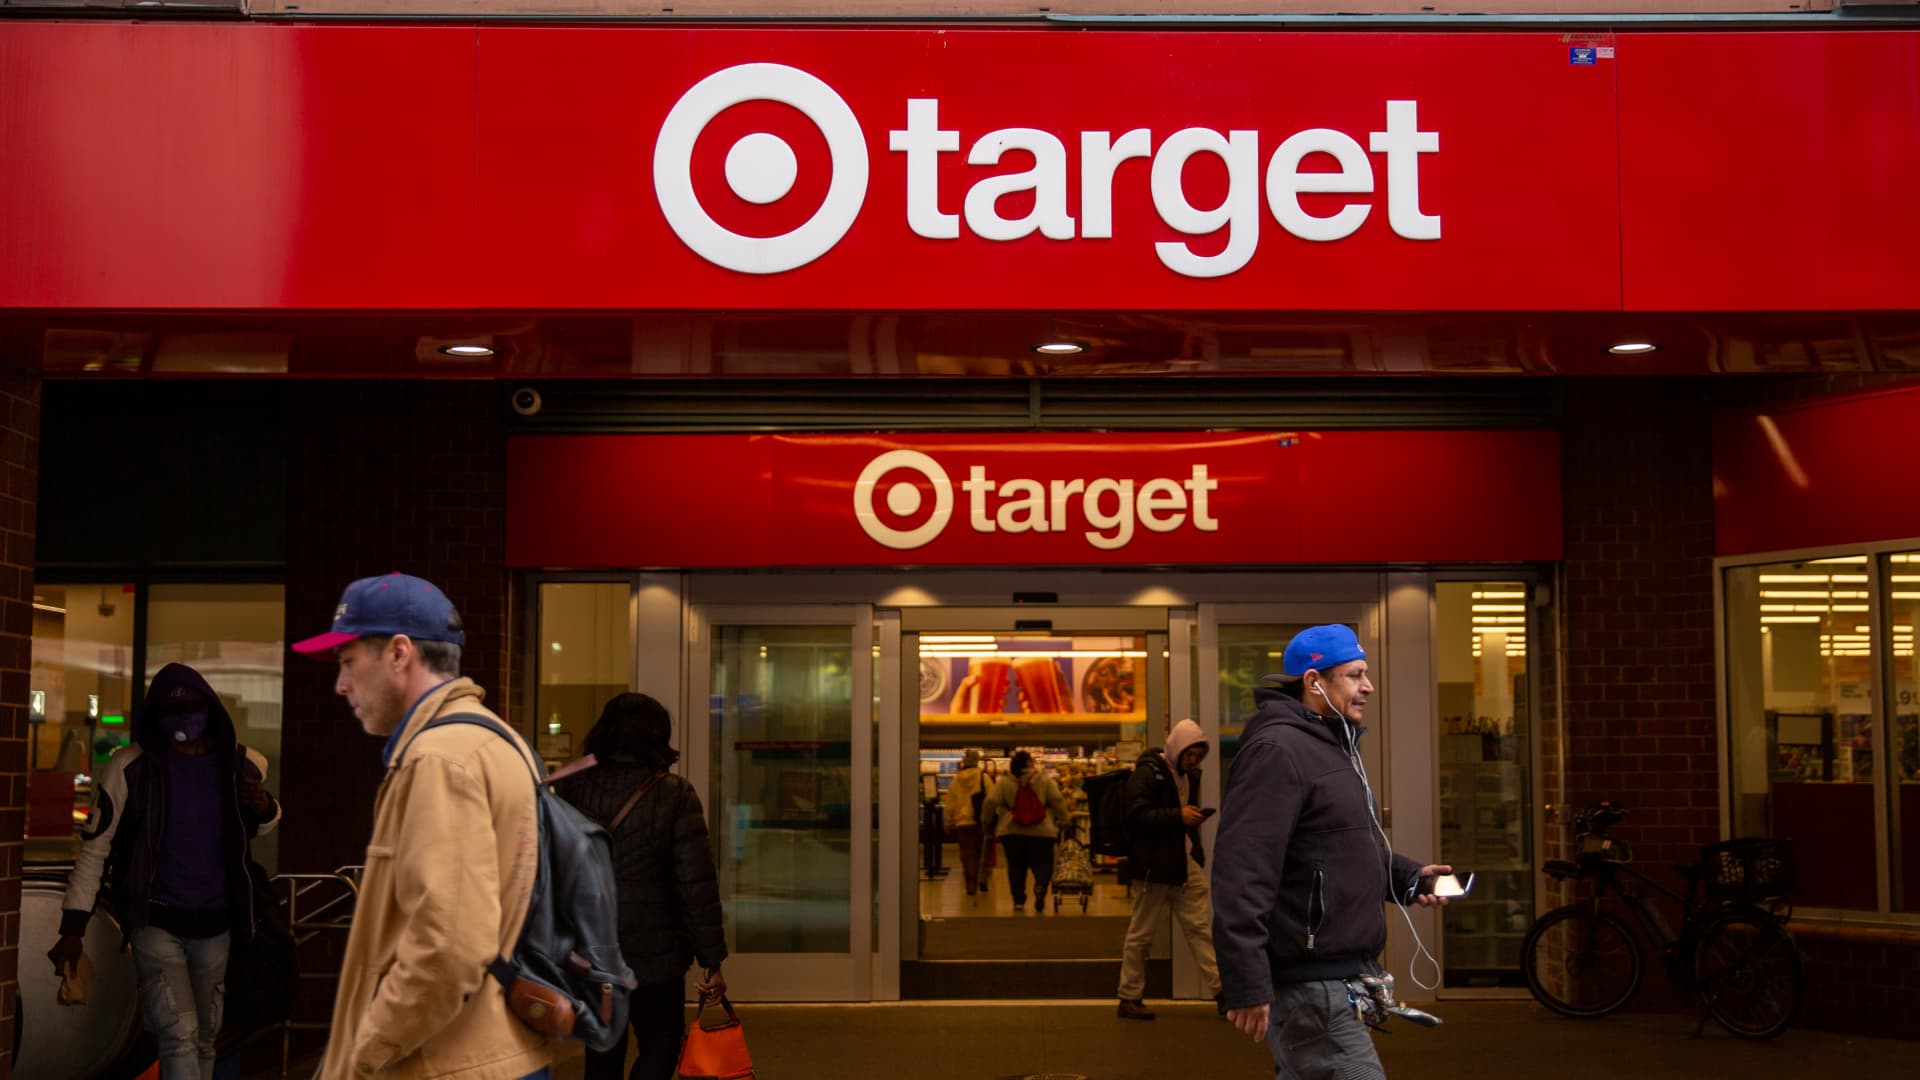 Target launches paid membership program as it chases new revenue streams